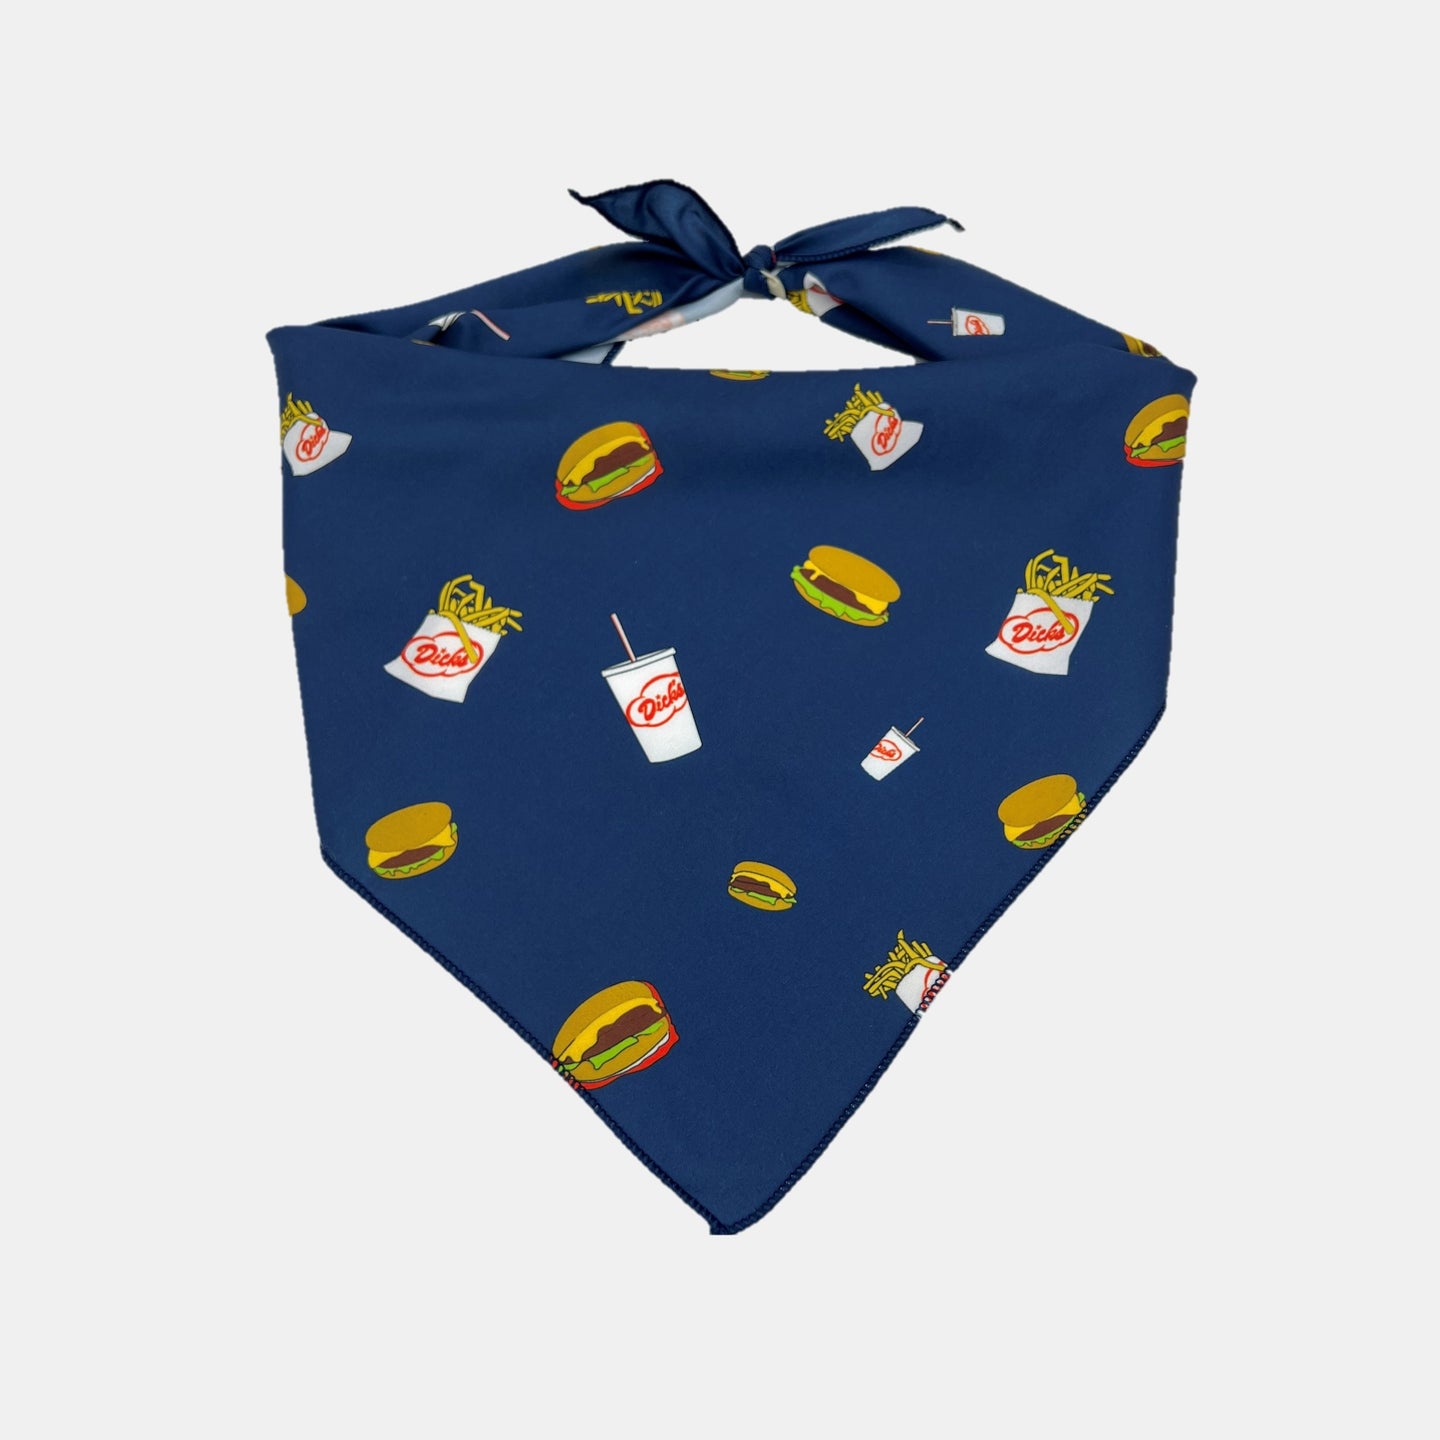 Navy blue pet bandana with all over burger, fry, and milkshake pattern